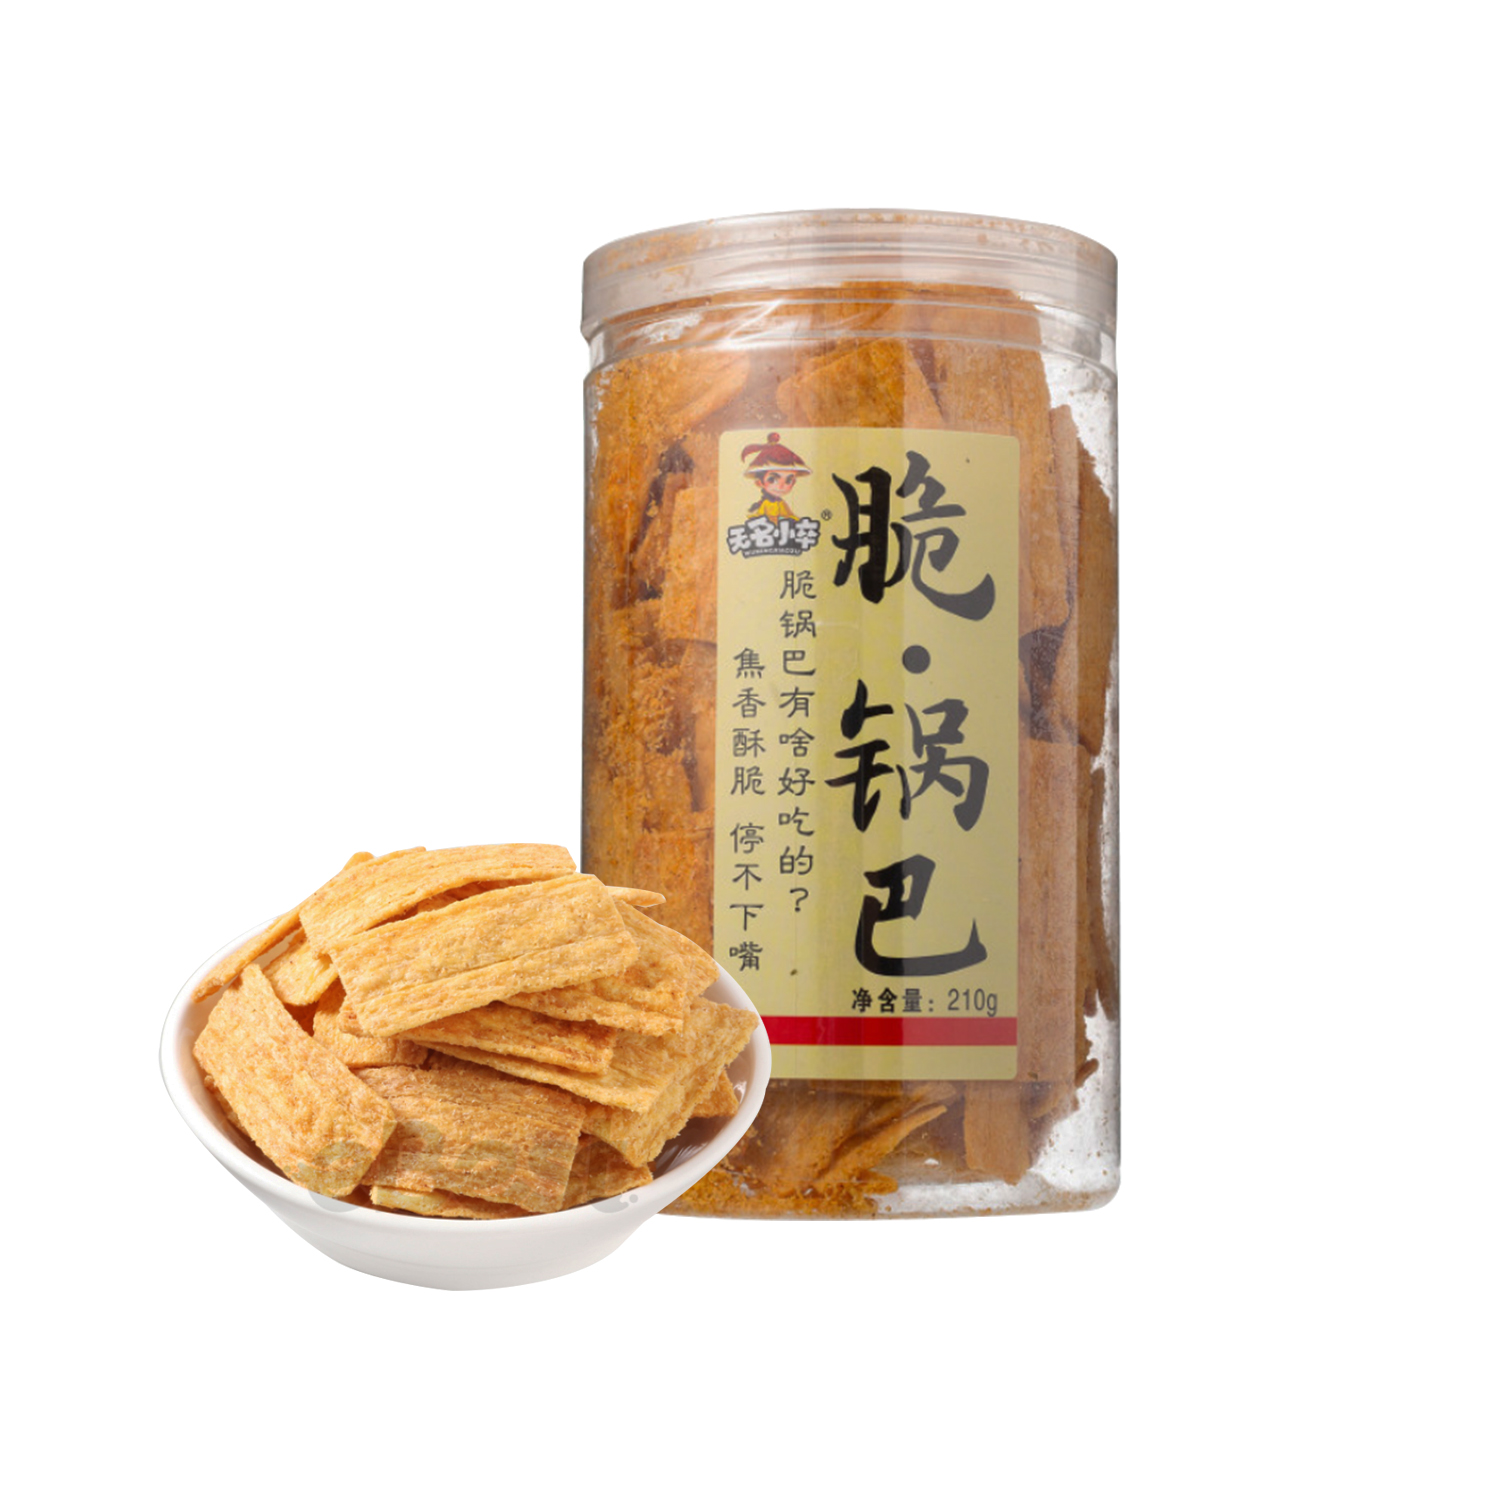 Wumingxiaozu Crispy Rice Cracker (210g) - Original Flavour-eBest-Nuts & Dried Fruit,Snacks & Confectionery